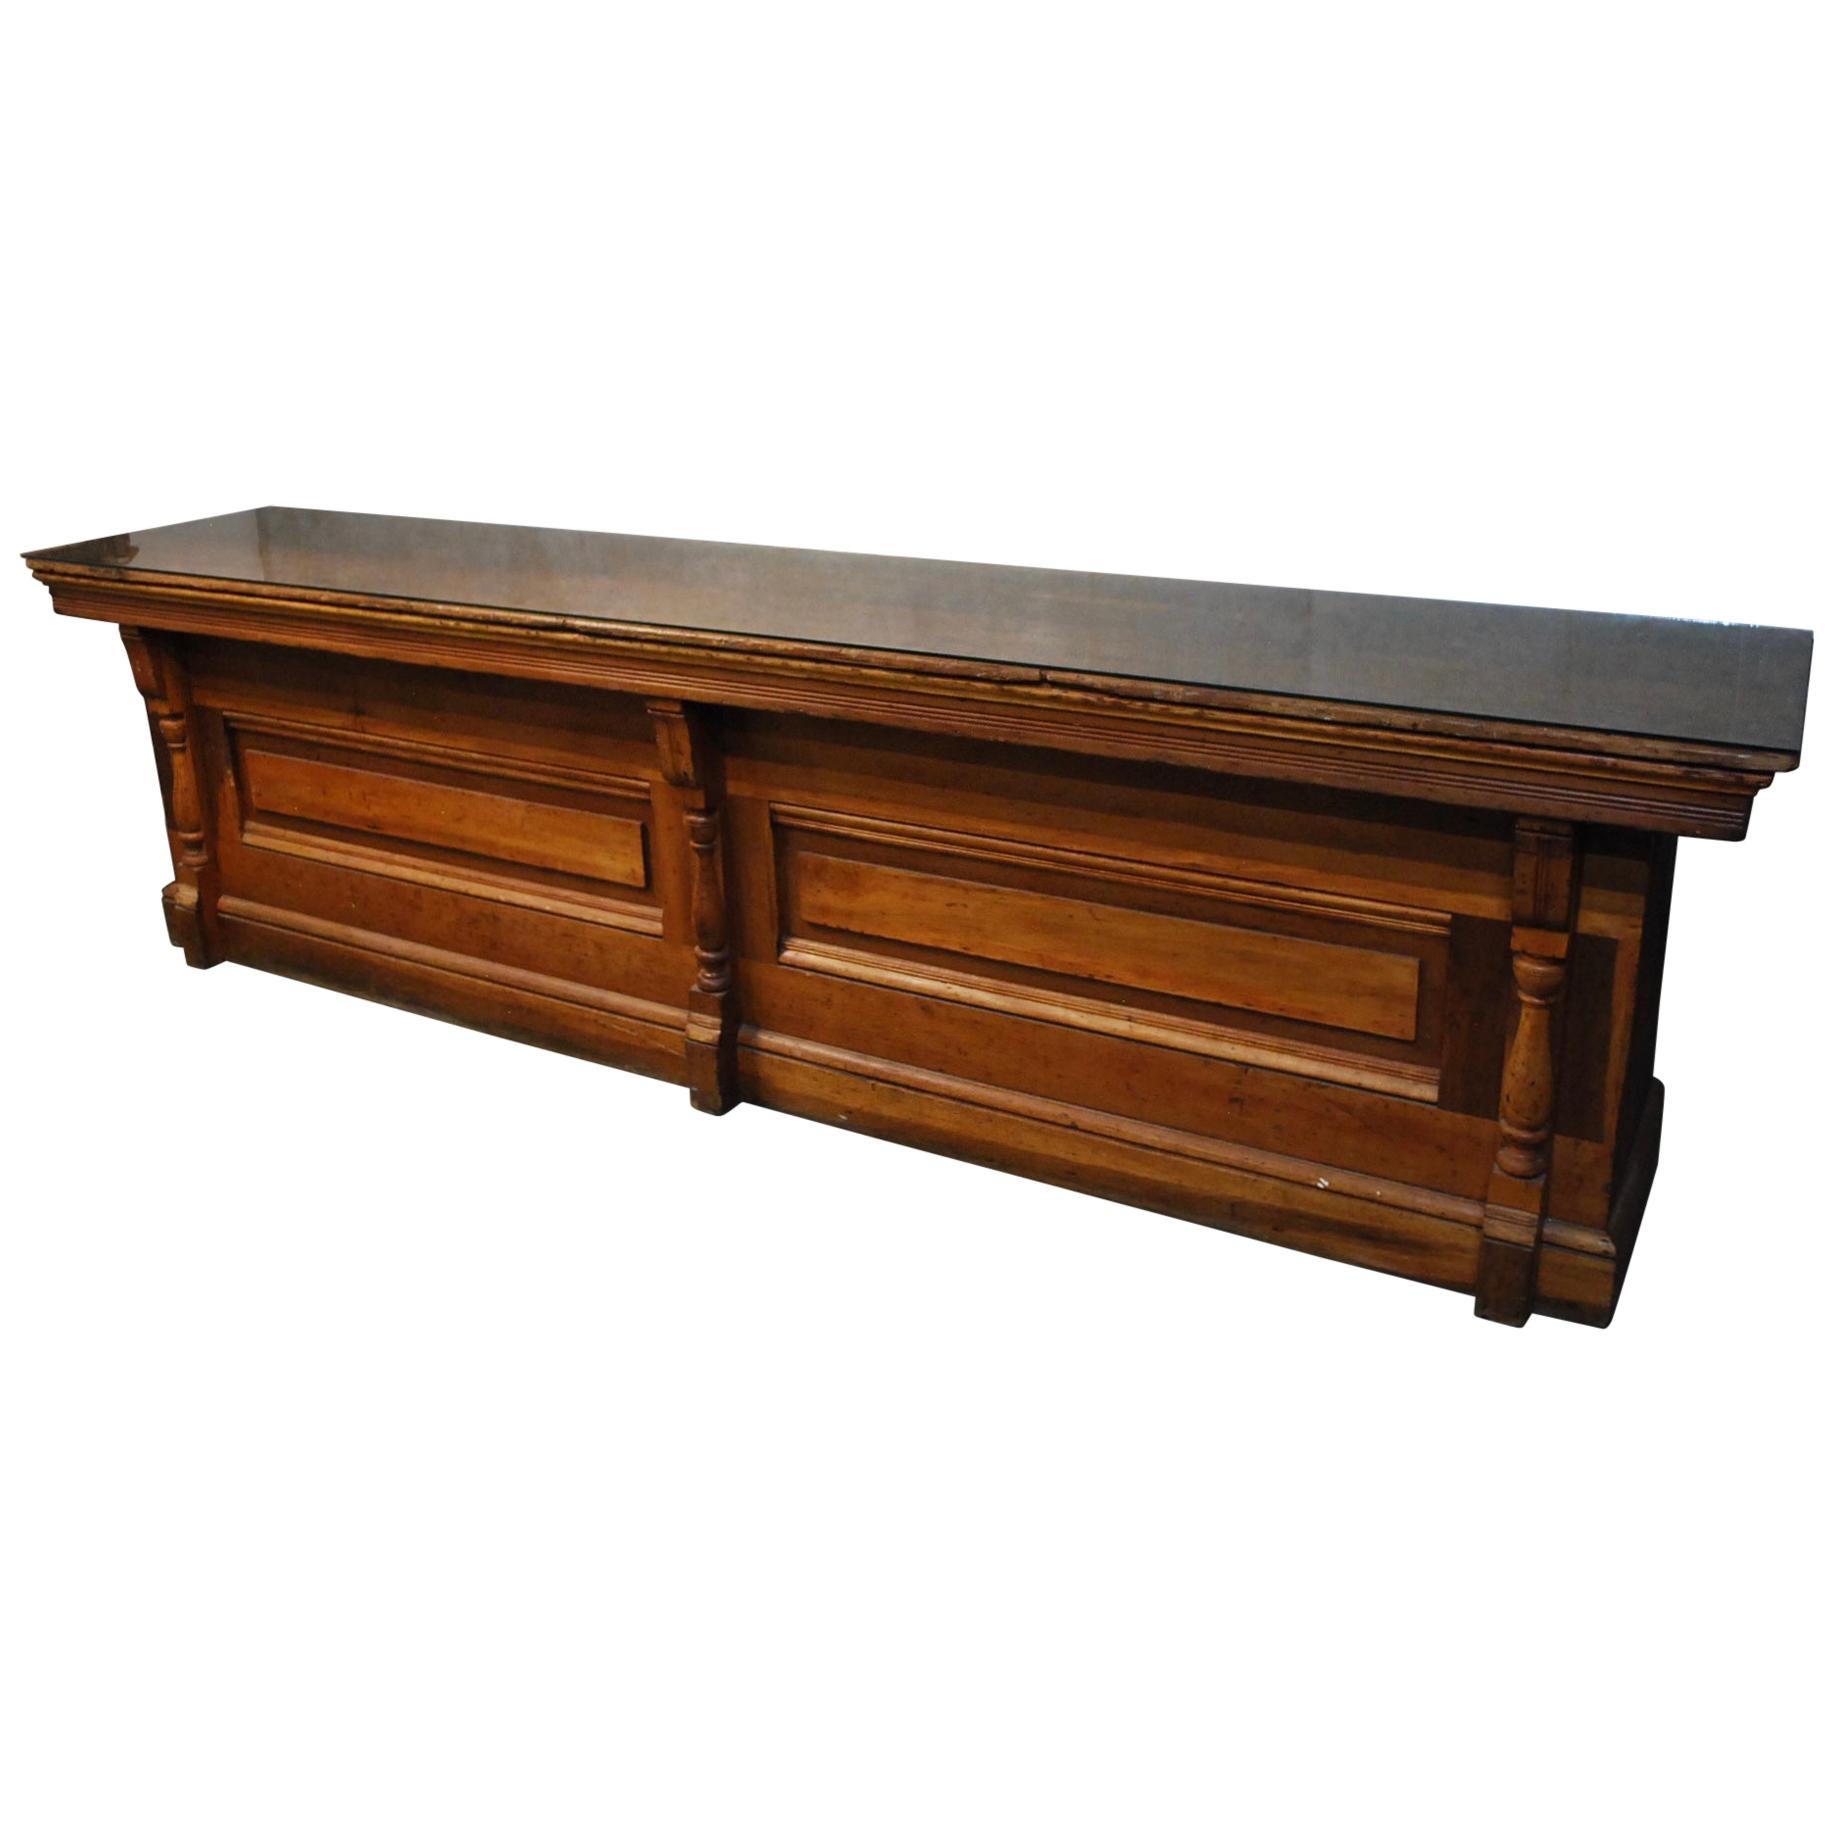 19th Century Wooden Original General Store Counter